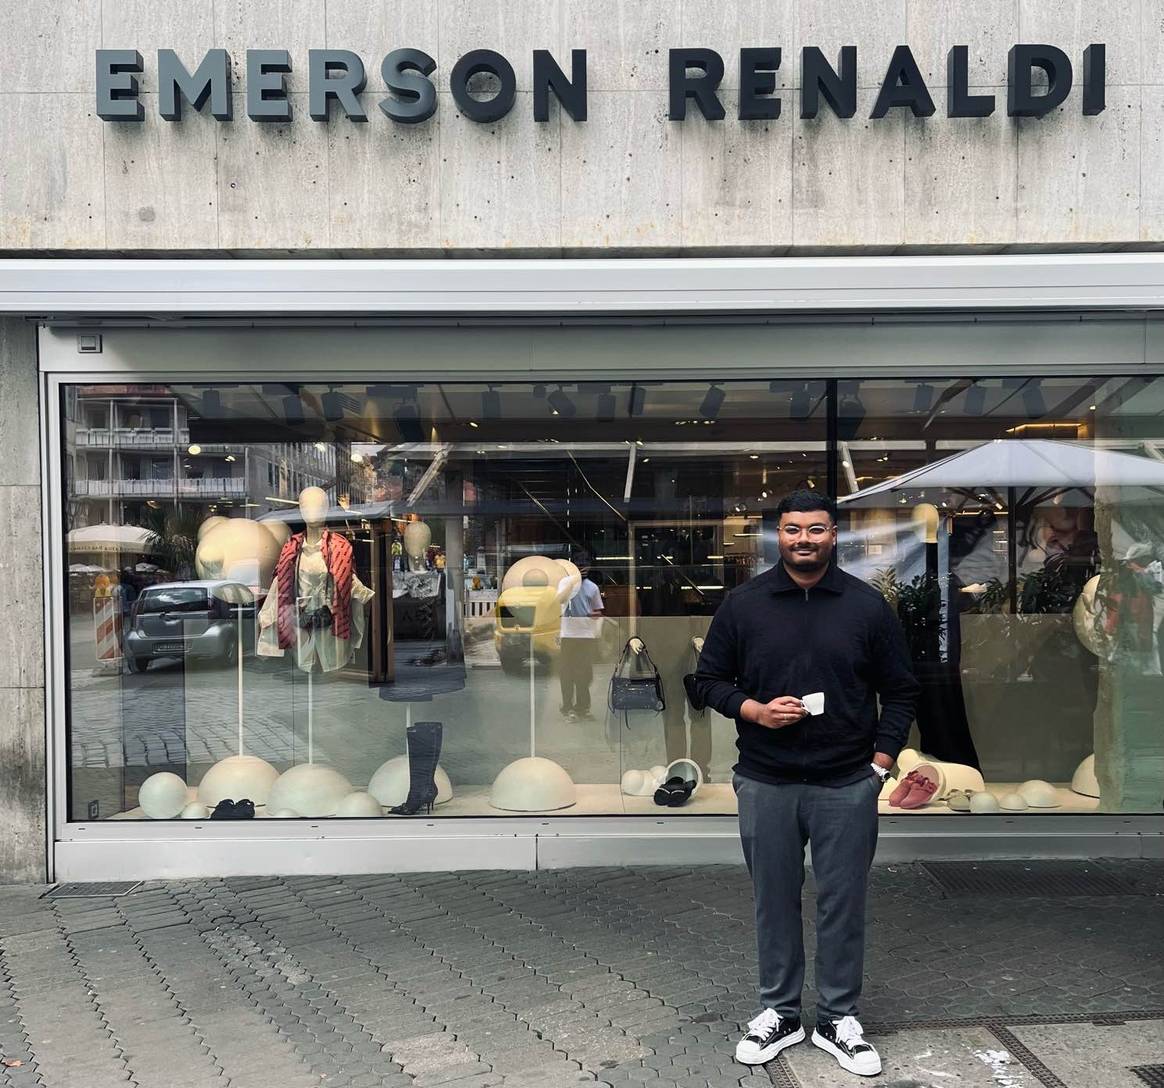 Niloy Rahman in front of the Emerson Renaldi store in Nuremberg